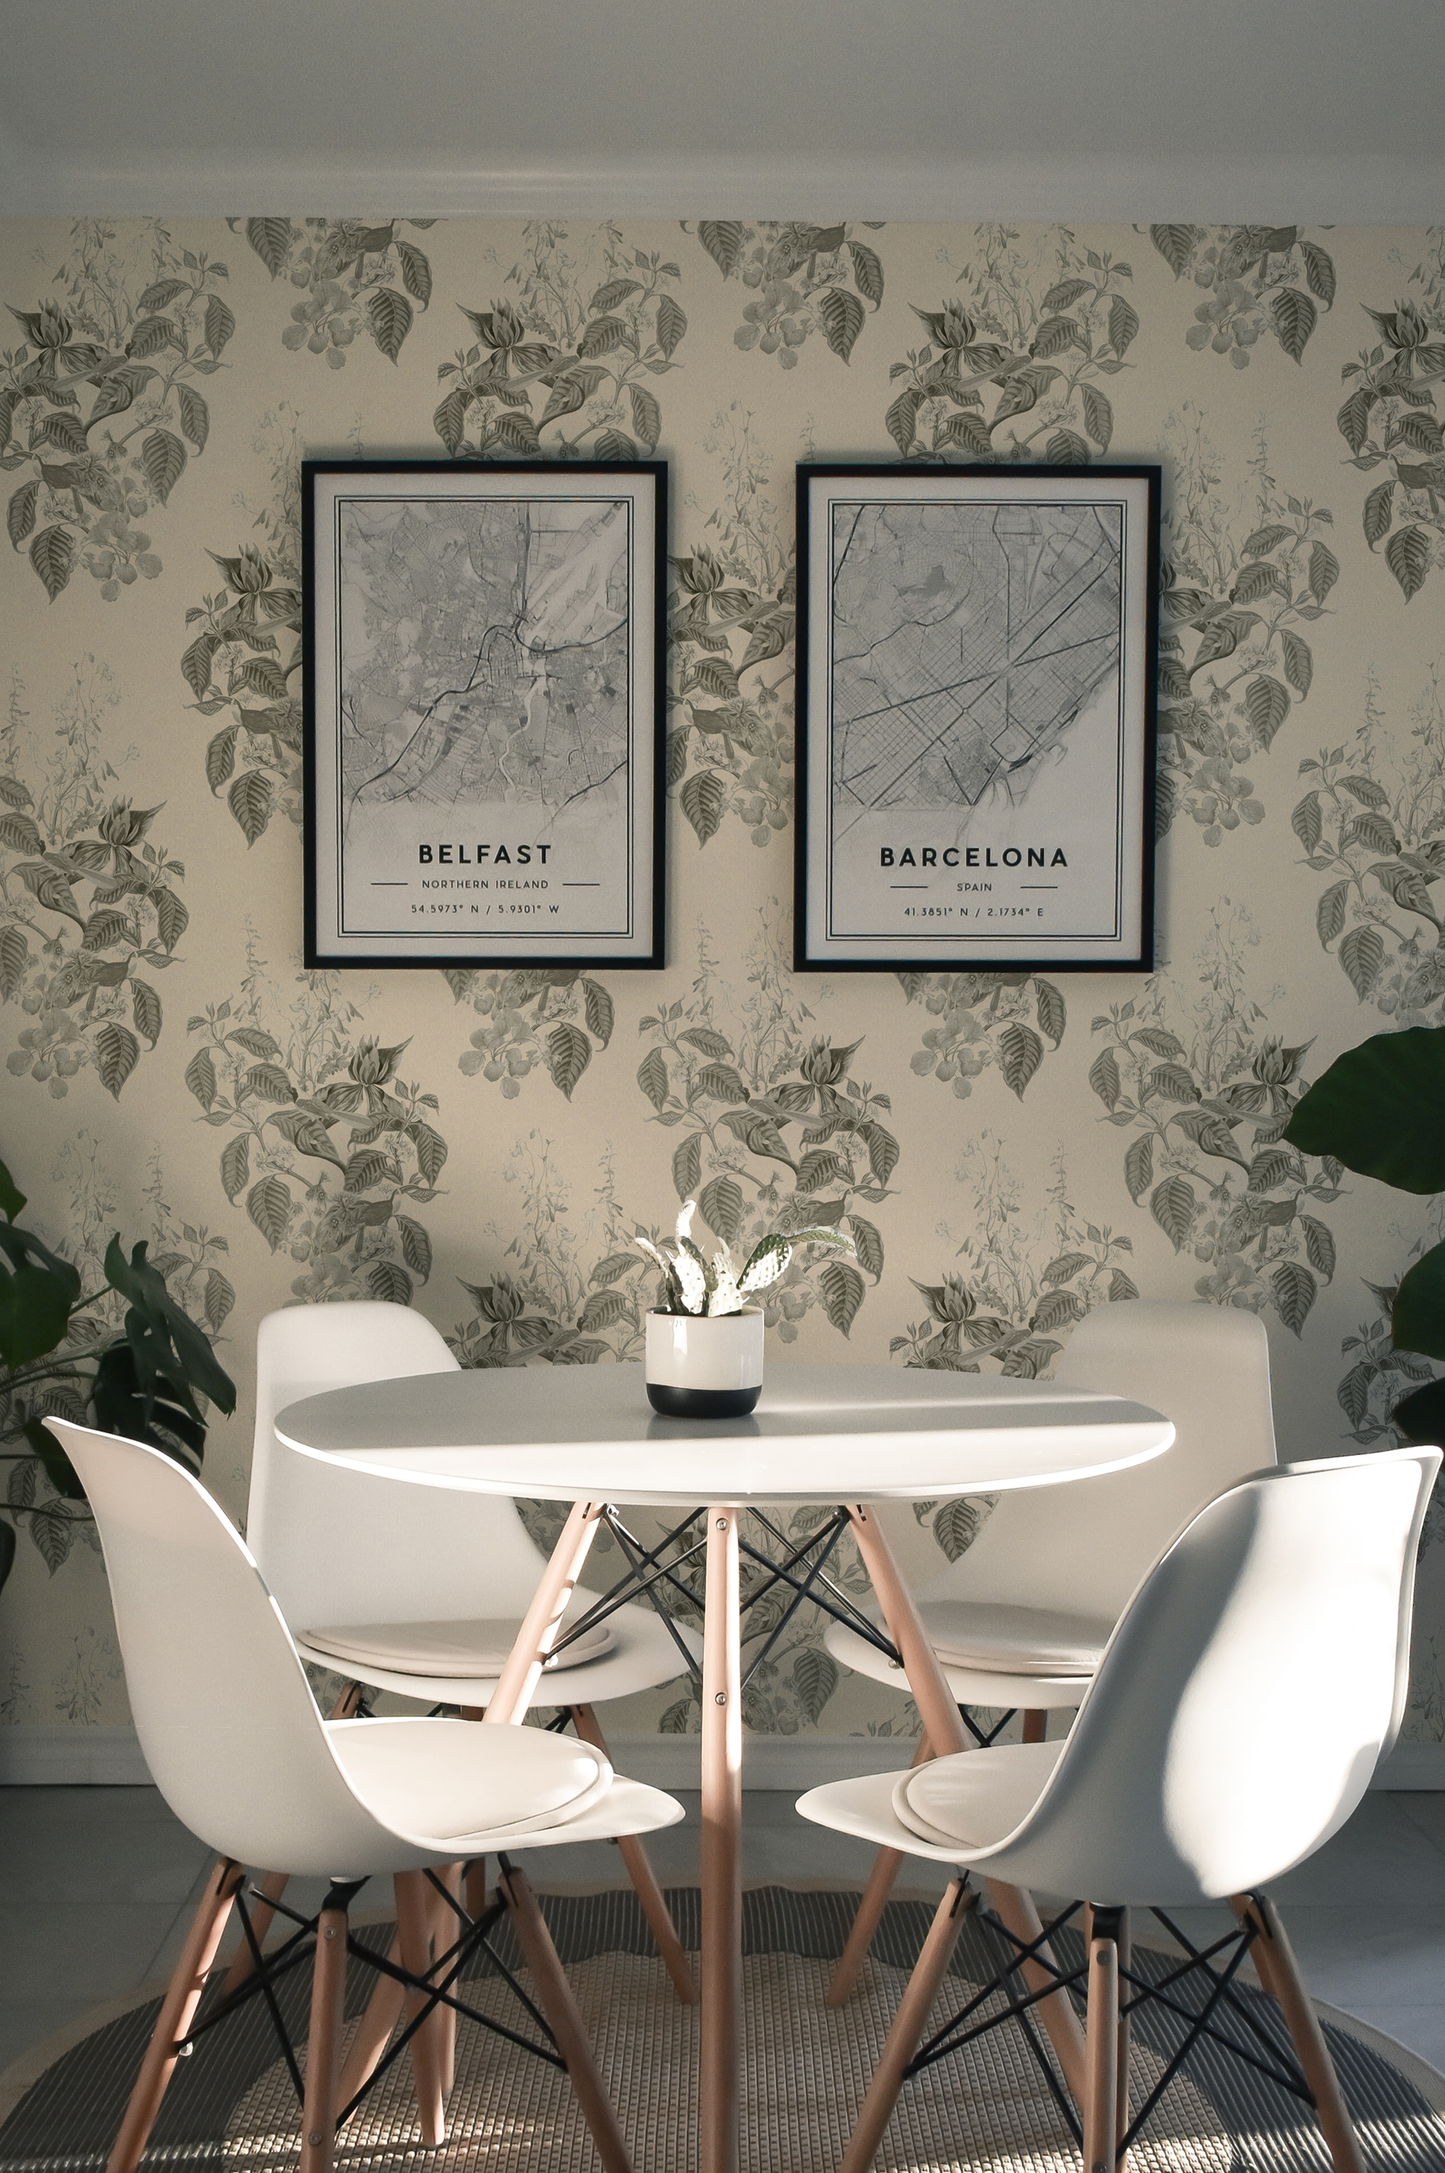 Table and chairs in dining room surrounded Luxury Botanical Deus ex Gardenia Aviary Isle Wallpaper in French Gray. Photo by Jake Goossen.